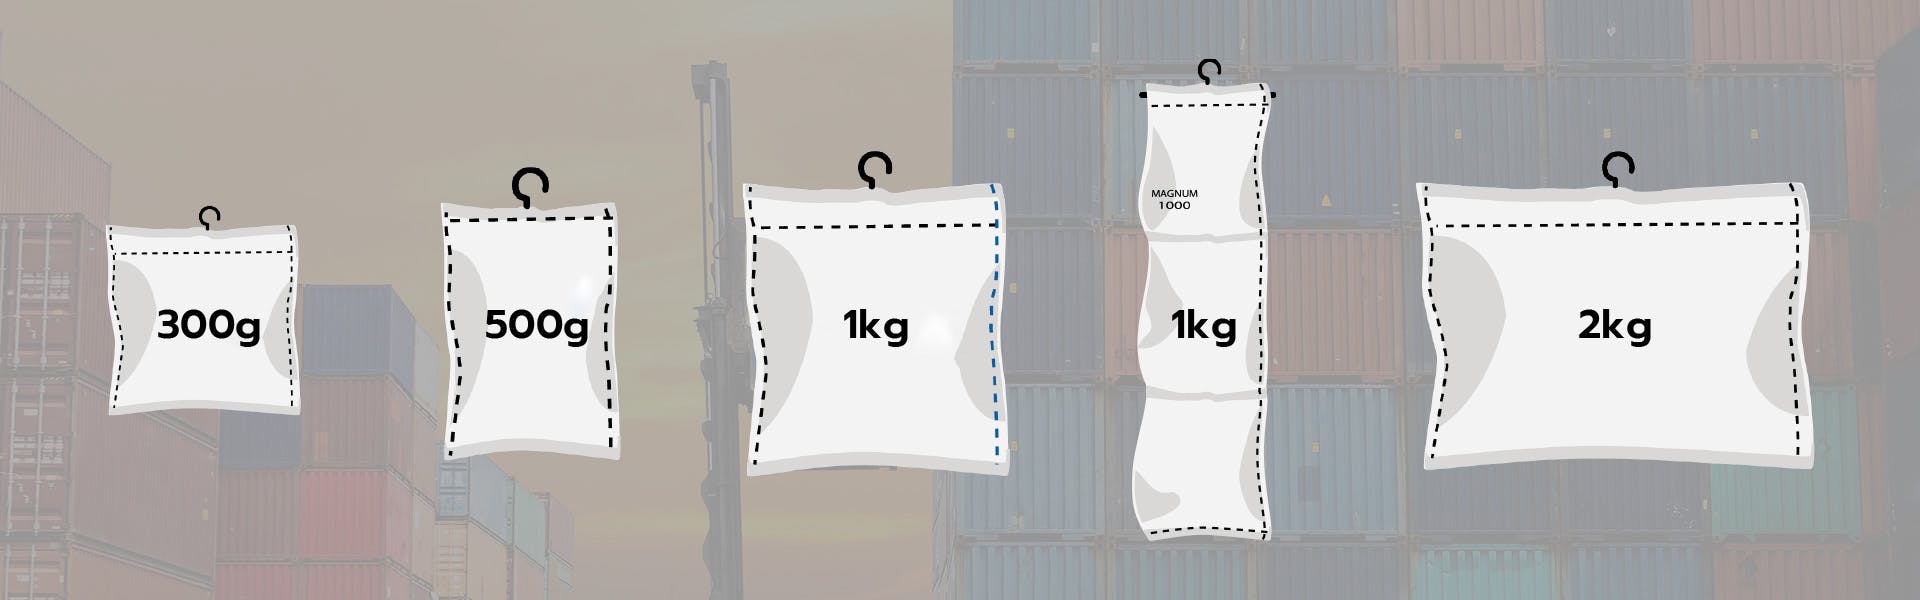 dessicant bags sizes article containerized shipping solutions banner